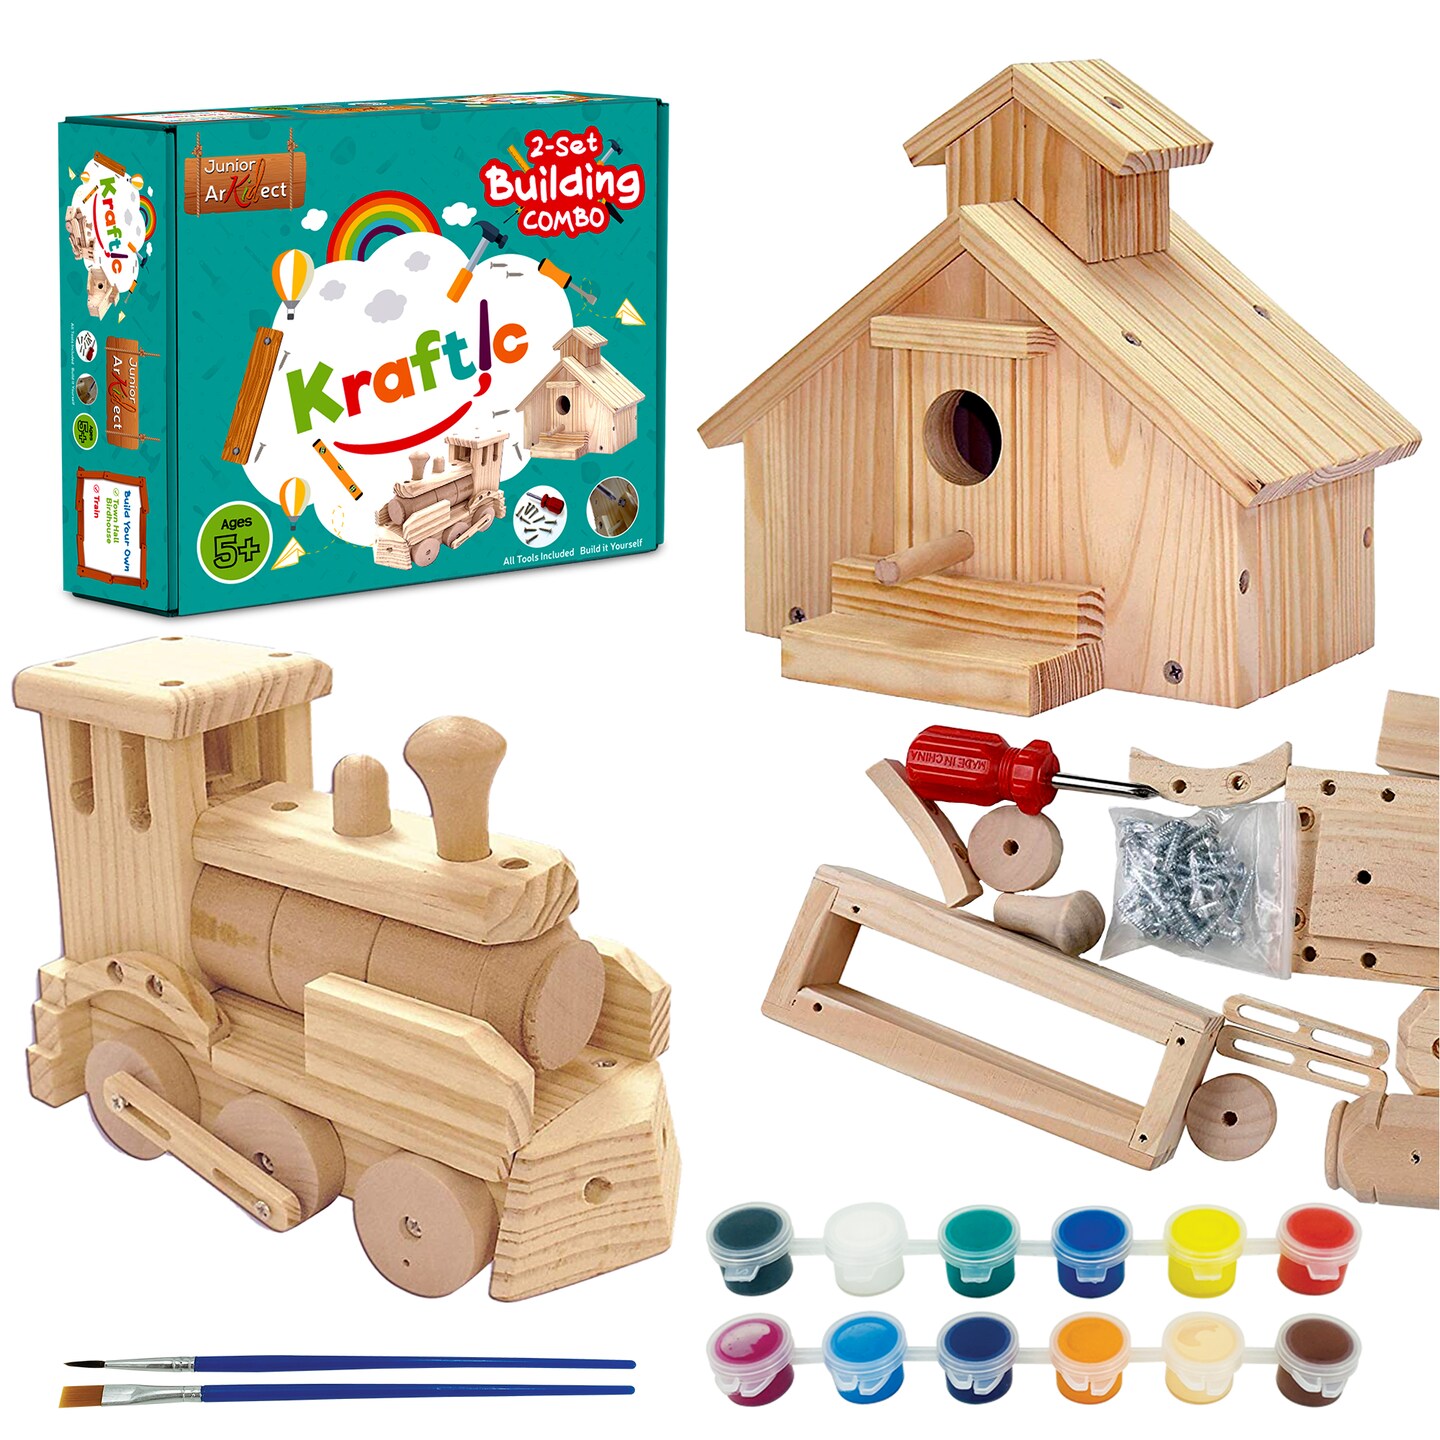 Woodworking Kits for Kids  Woodworking kit for kids, Woodworking projects  for kids, Woodworking for kids